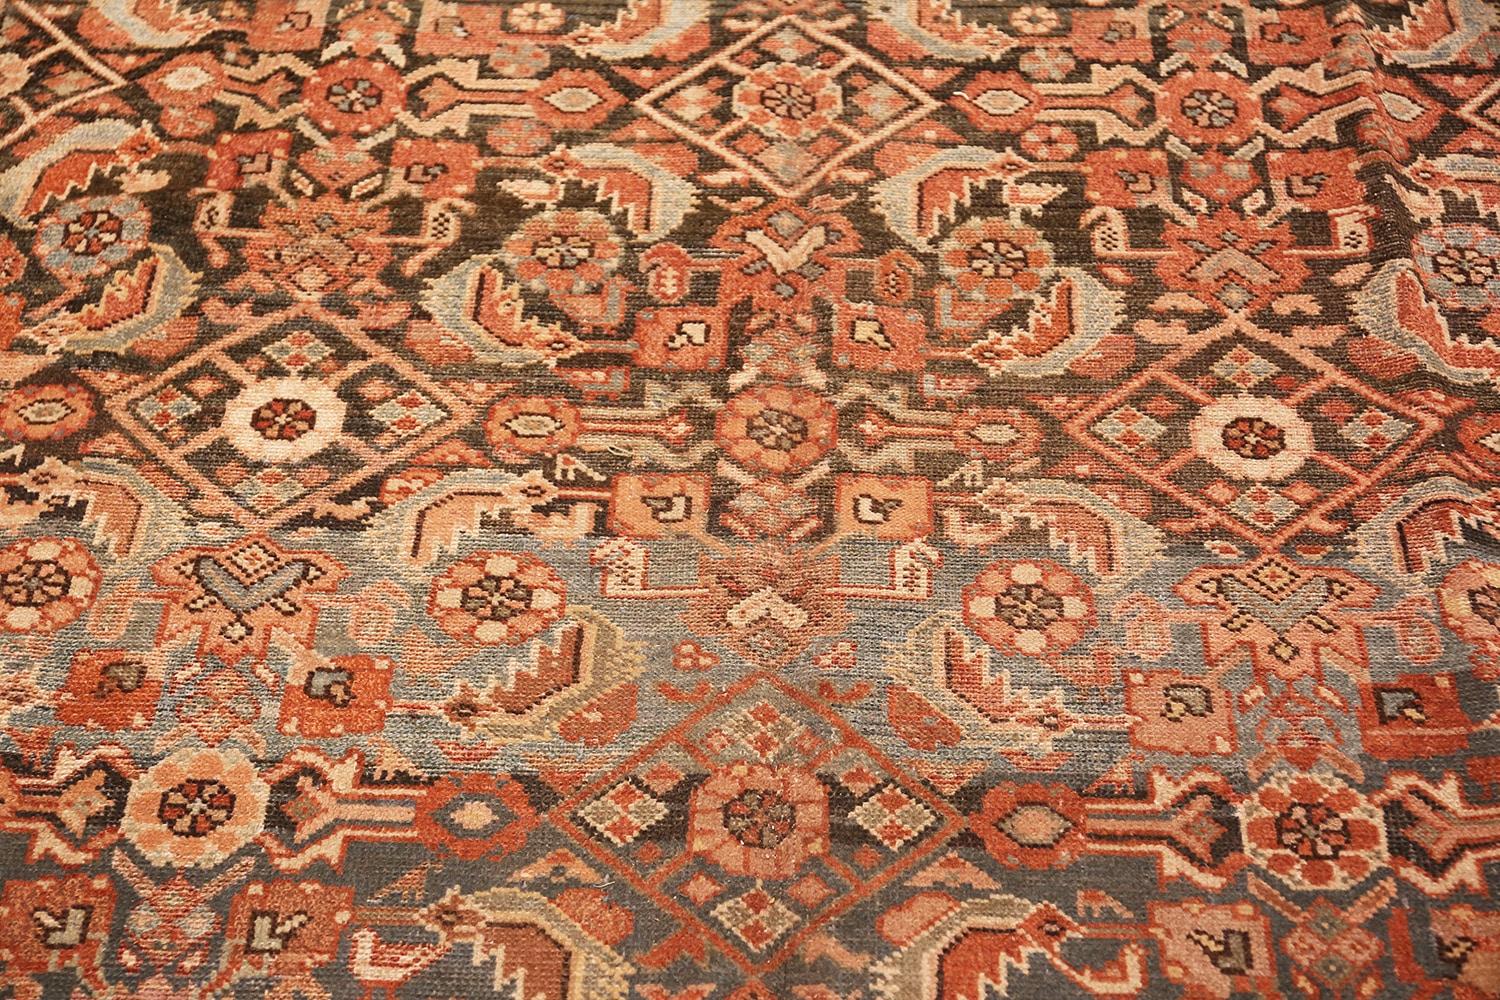 Antique Tribal Persian Malayer Rug. Size: 6' 6